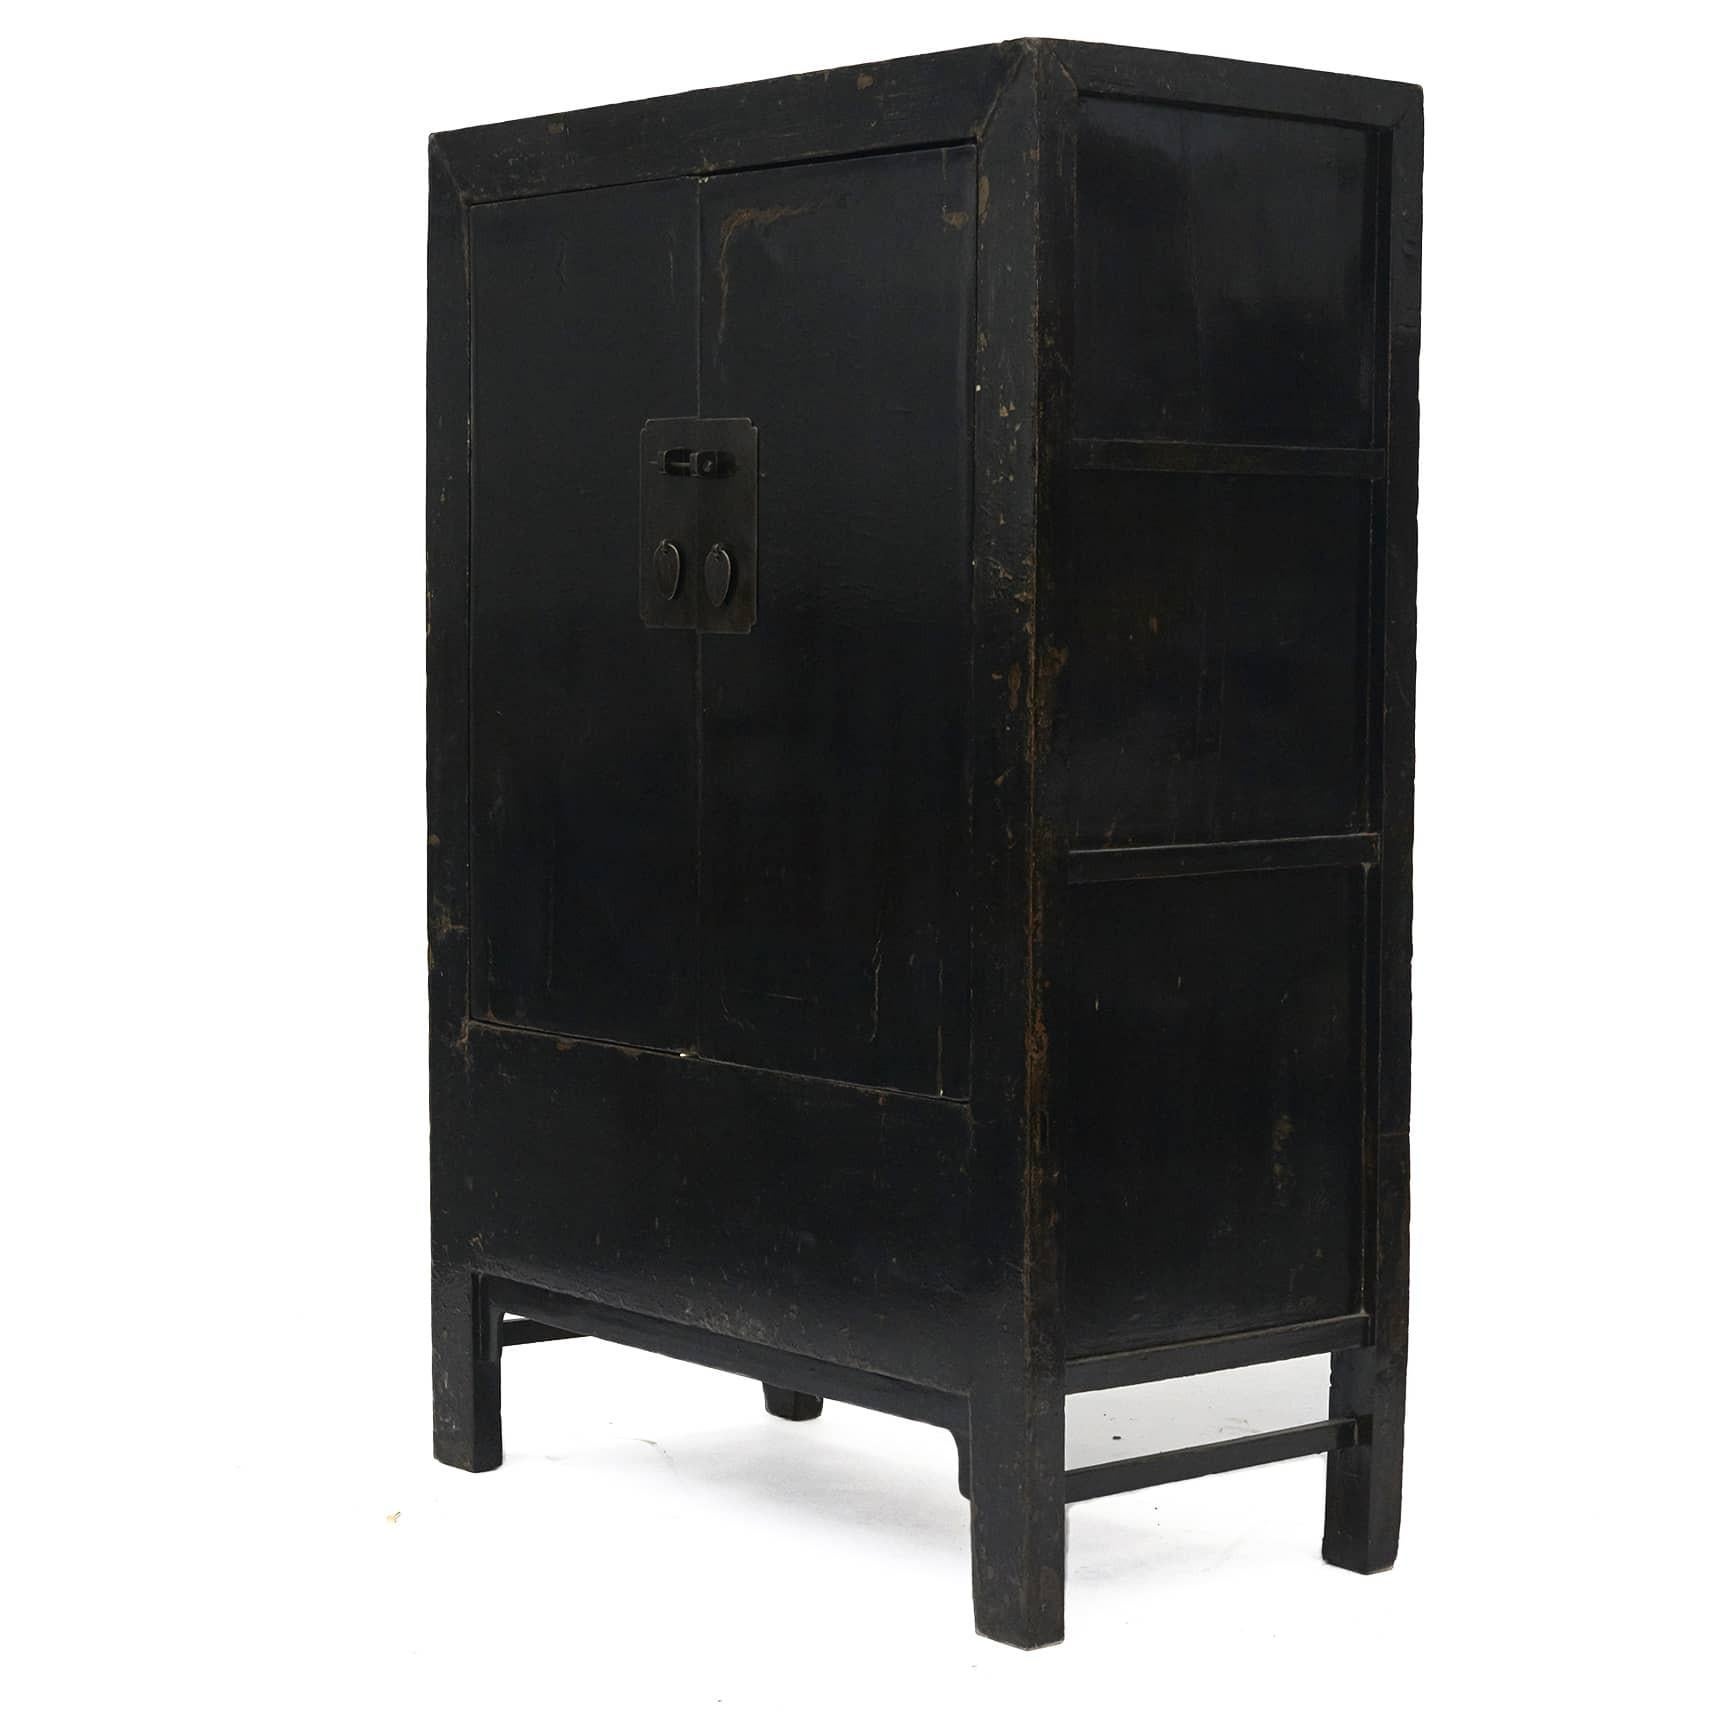 Original black lacquer cabinet with a pair of doors.

The front with a layer of 